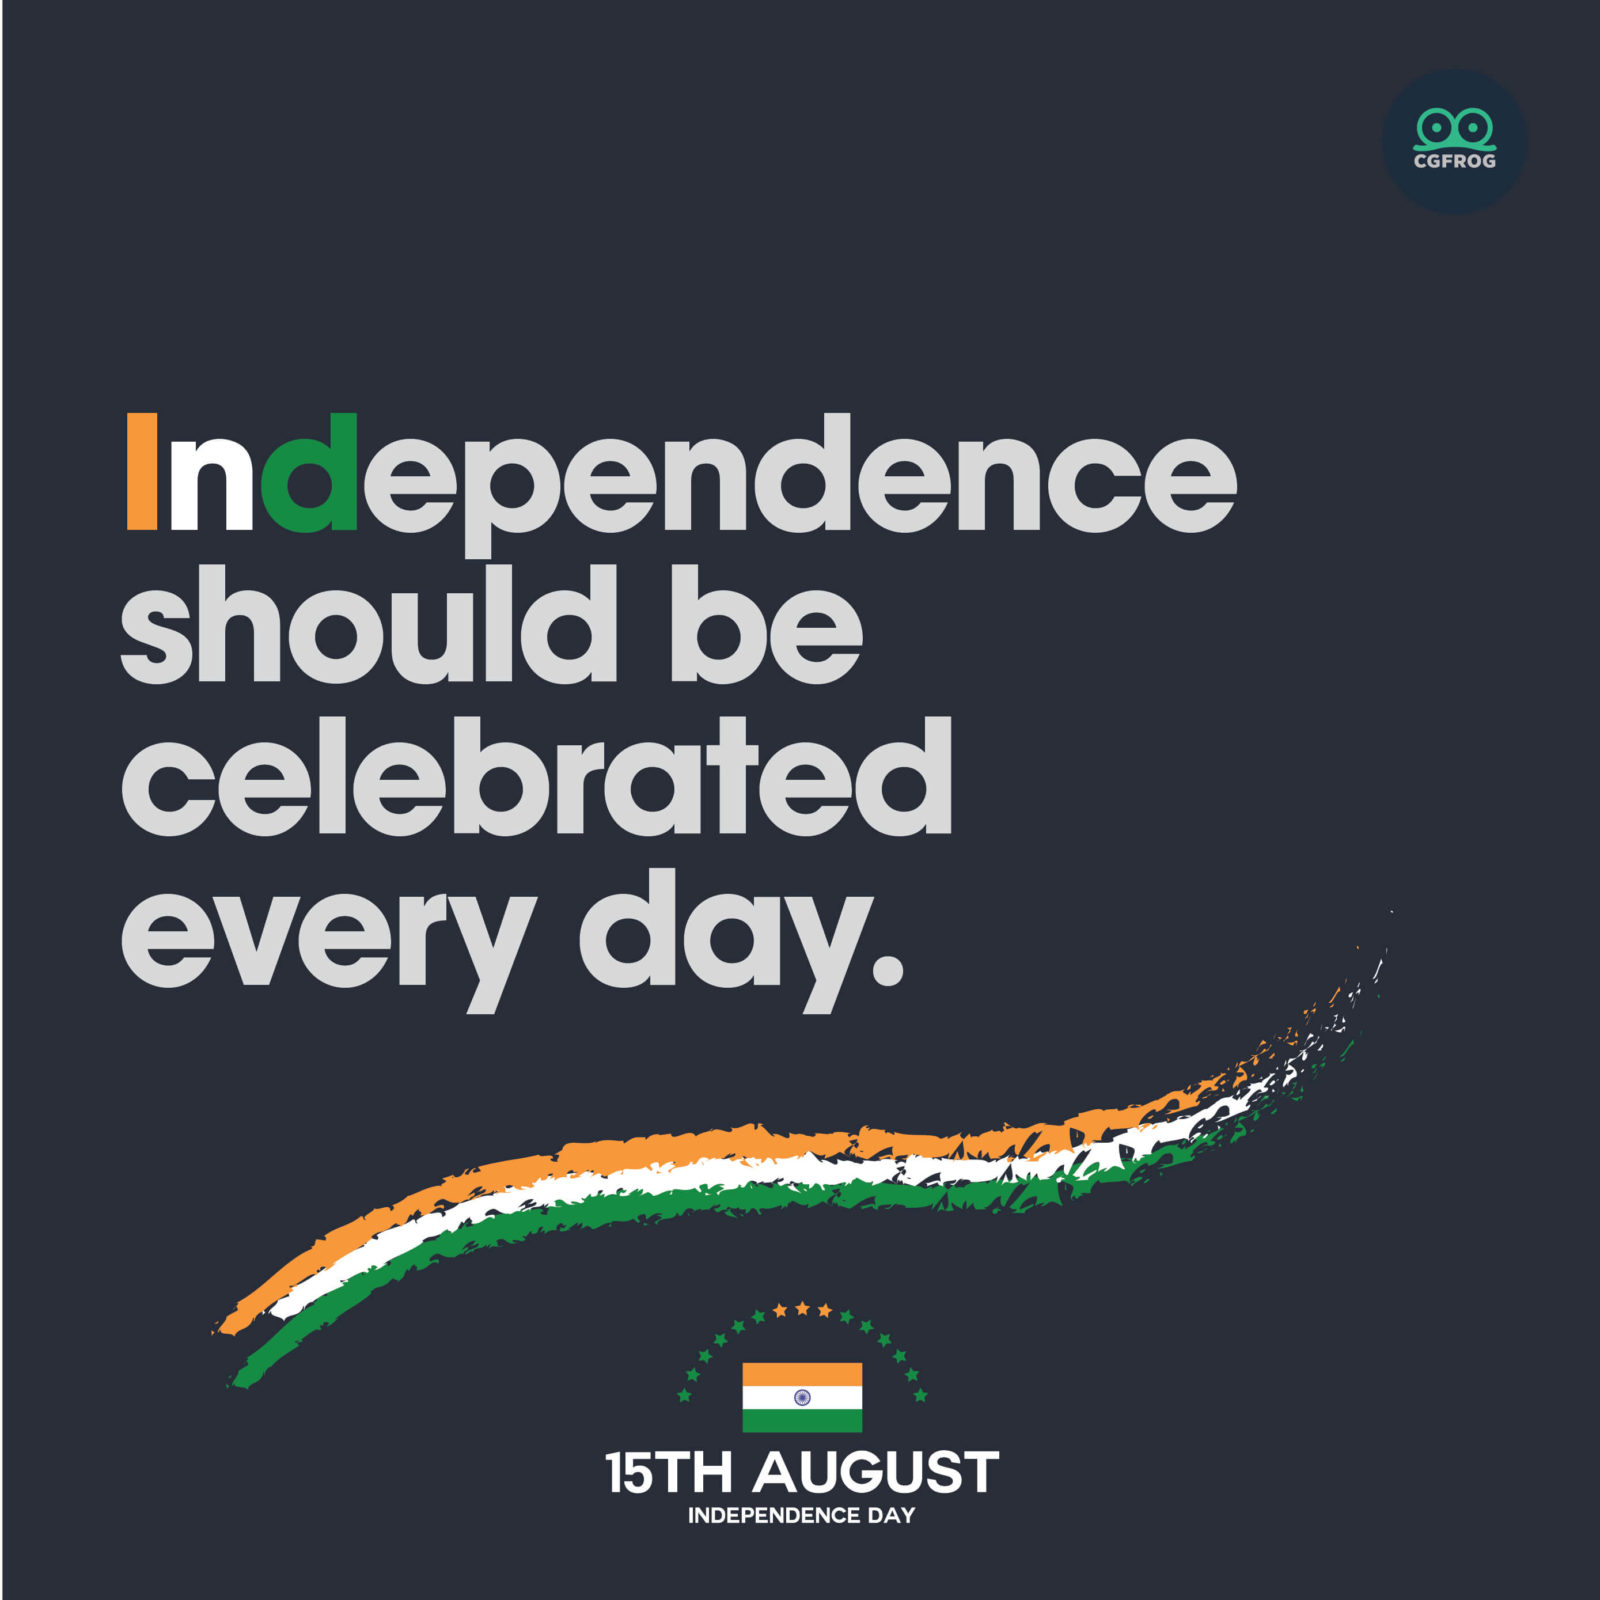 11 Independence Day 2019 Quotes, Wishes, Images for 73rd Independence